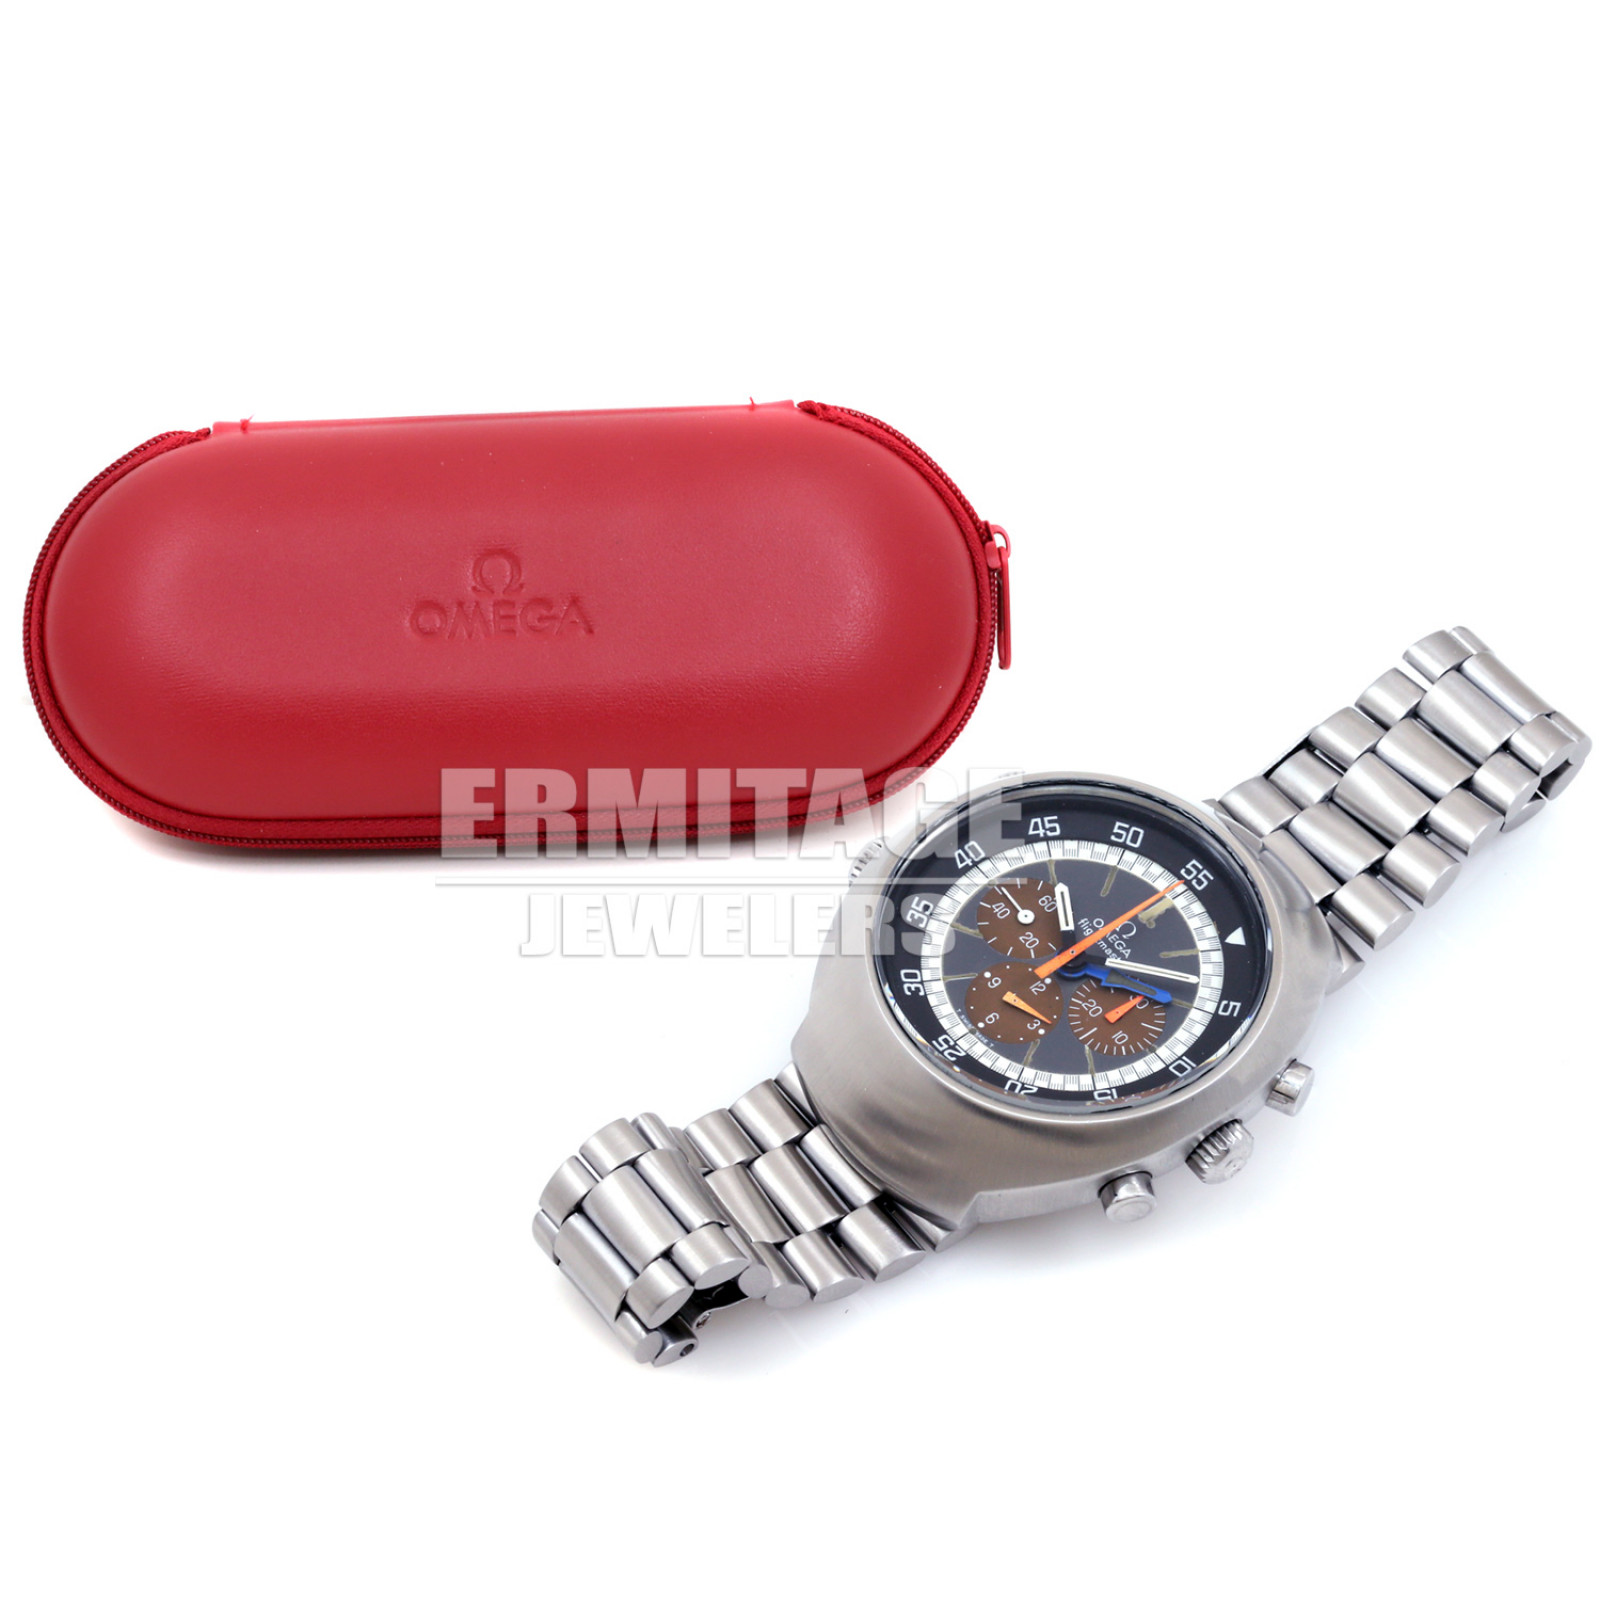 Sell Your Omega FlightMaster 143.026